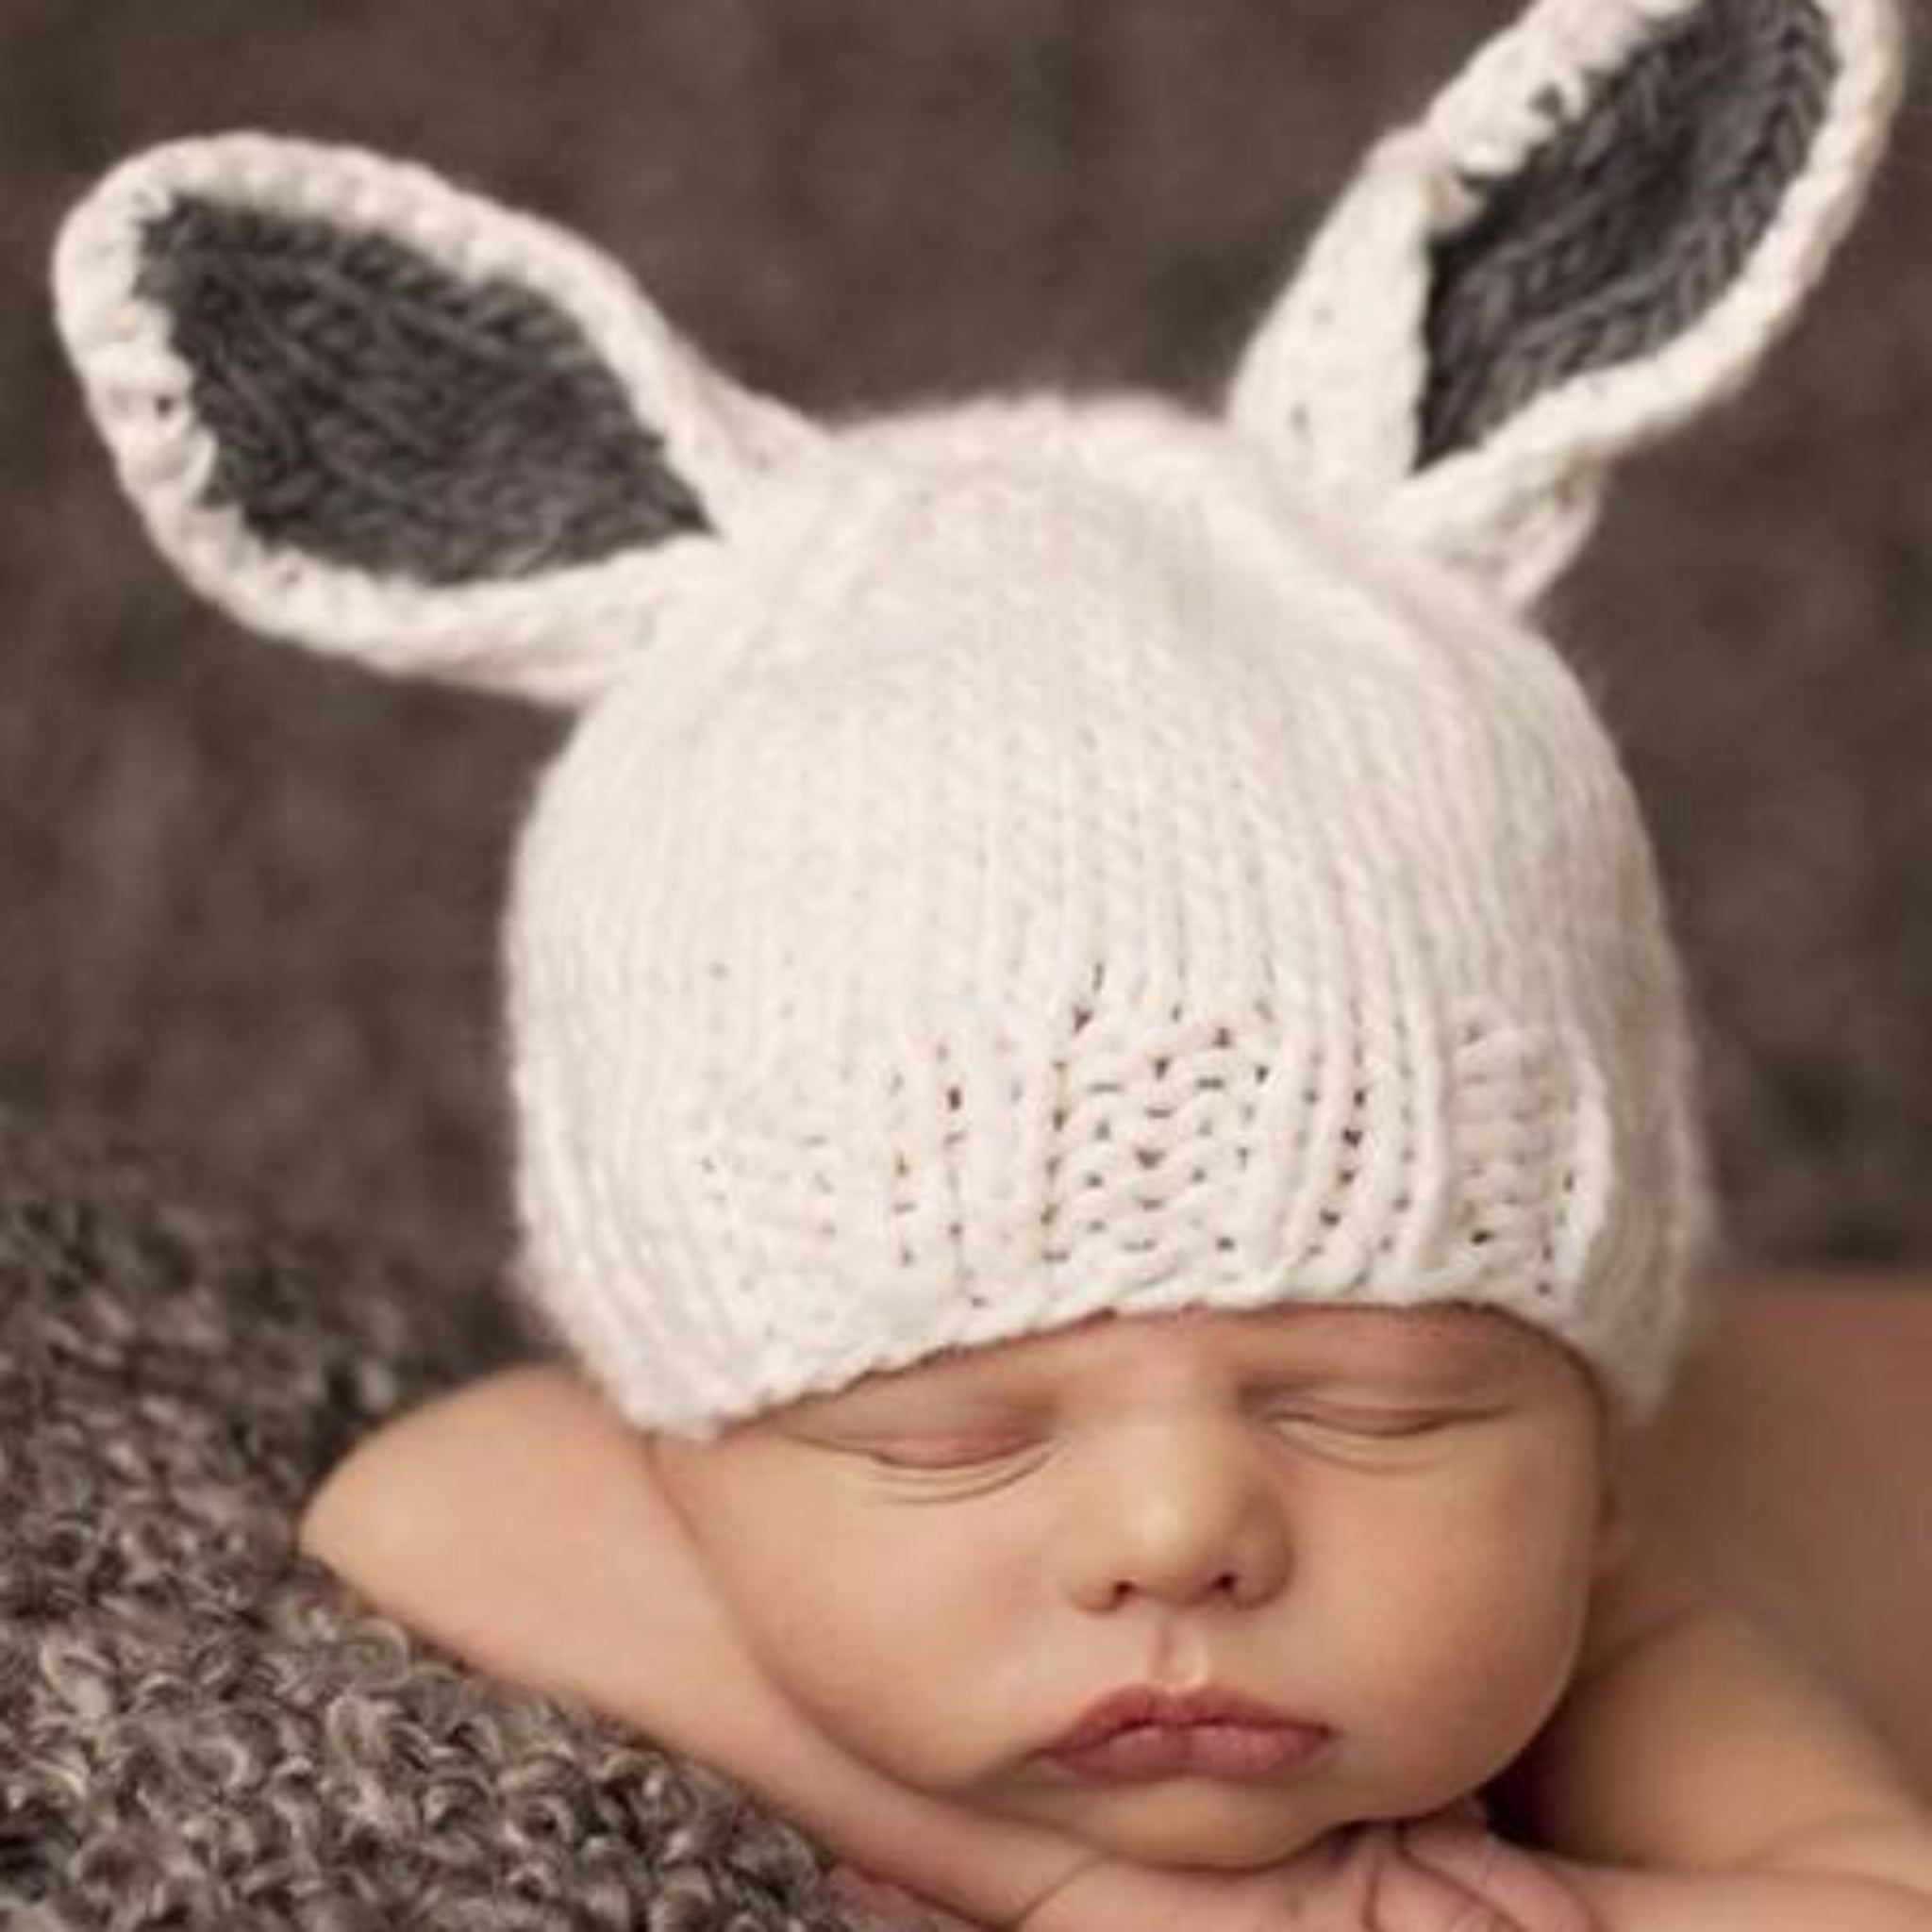 The Blueberry Hill Bailey Bunny Hand-Knit Hat, White with Gray Ears